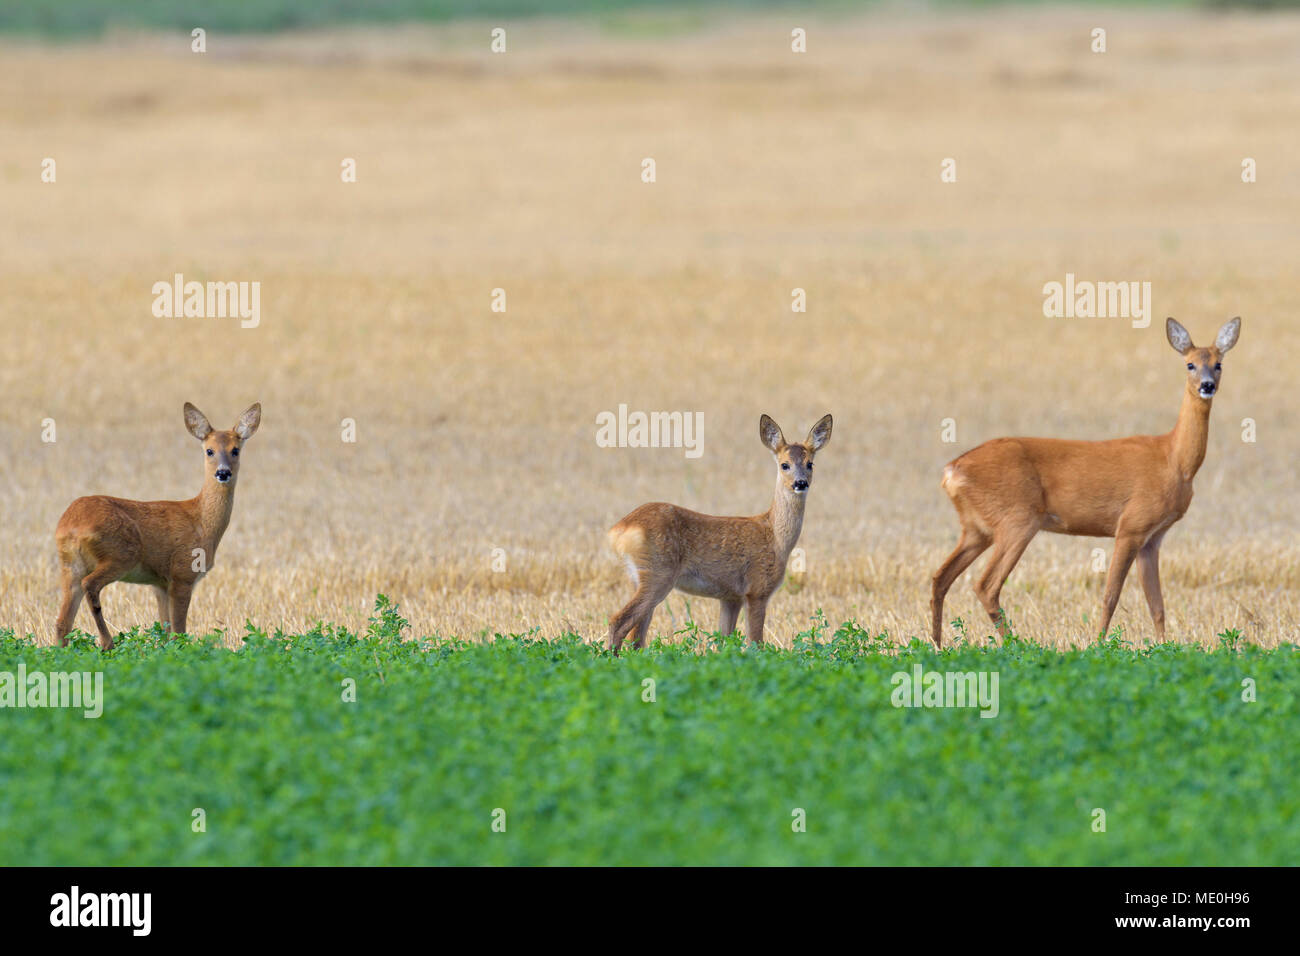 Western Roe deers (Capreolus capreolus), Female with fawns standing in a field looking at camera in Hesse, Germany Stock Photo